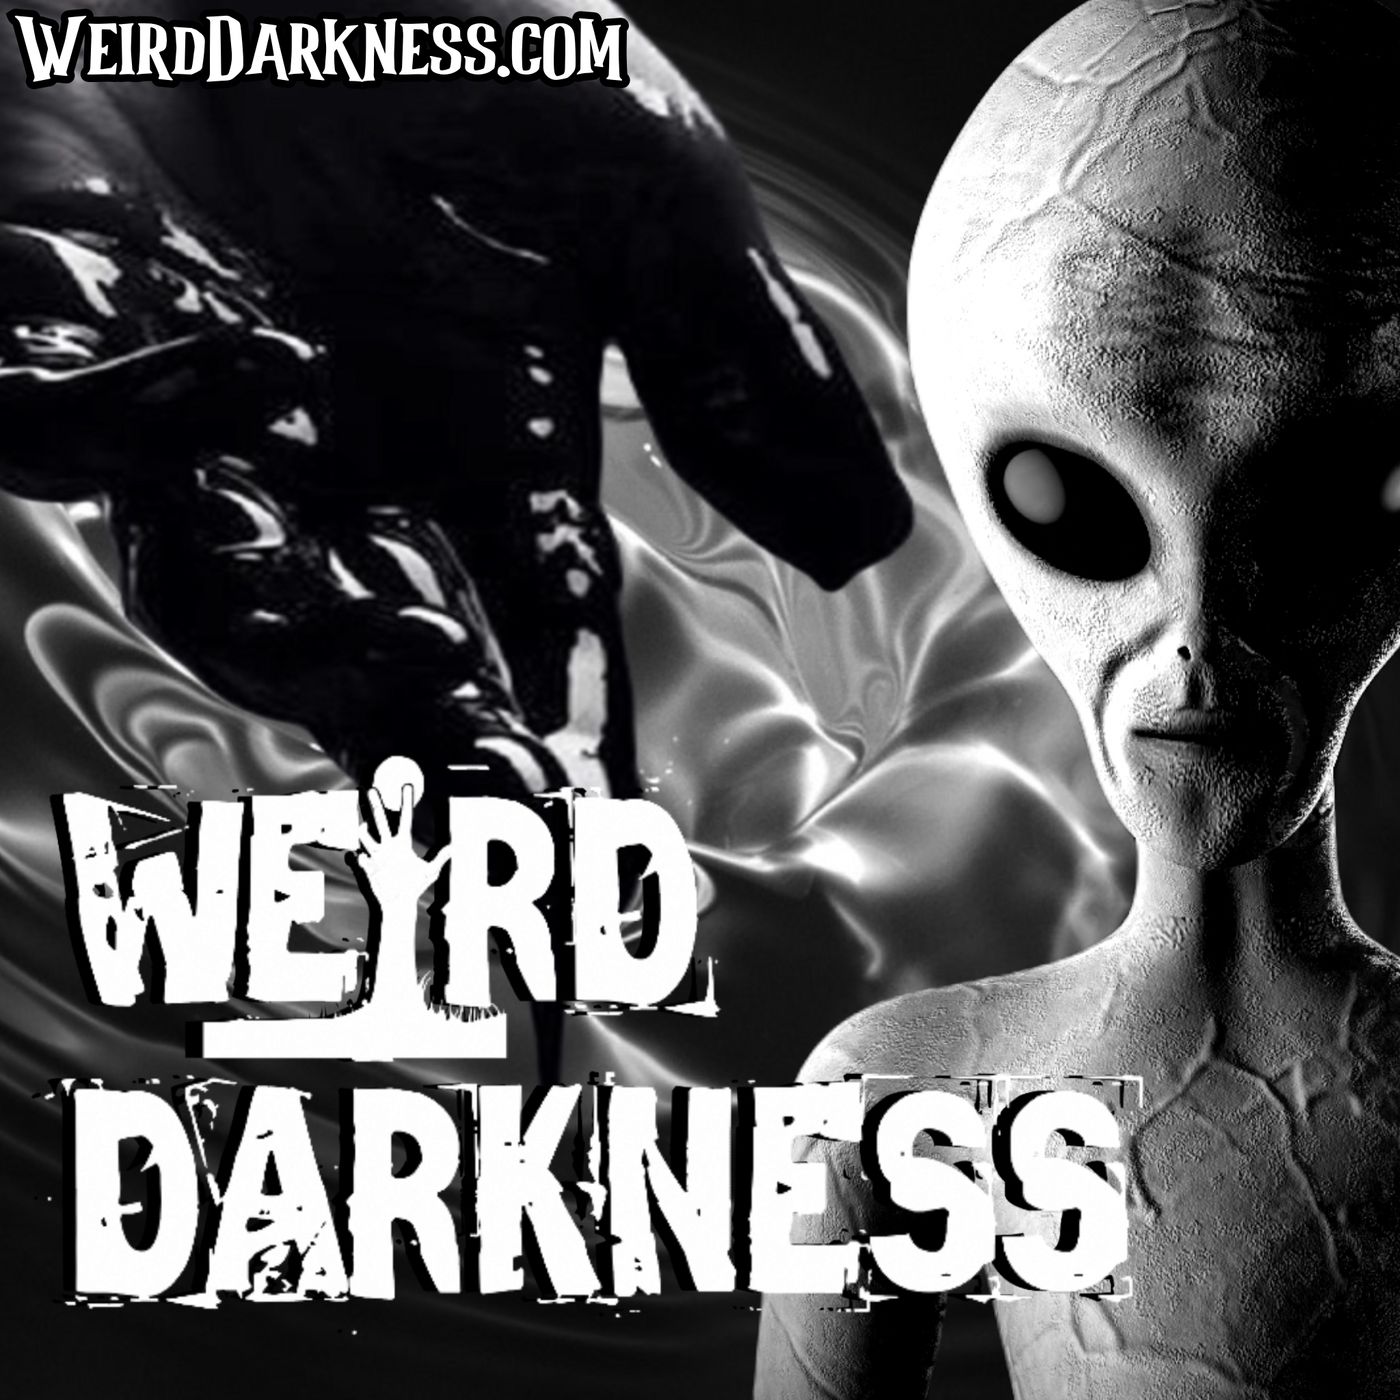 “THE ALIEN BLACK GOO INVADING EARTH” and More True Extraterrestrial Stories! #WeirdDarkness